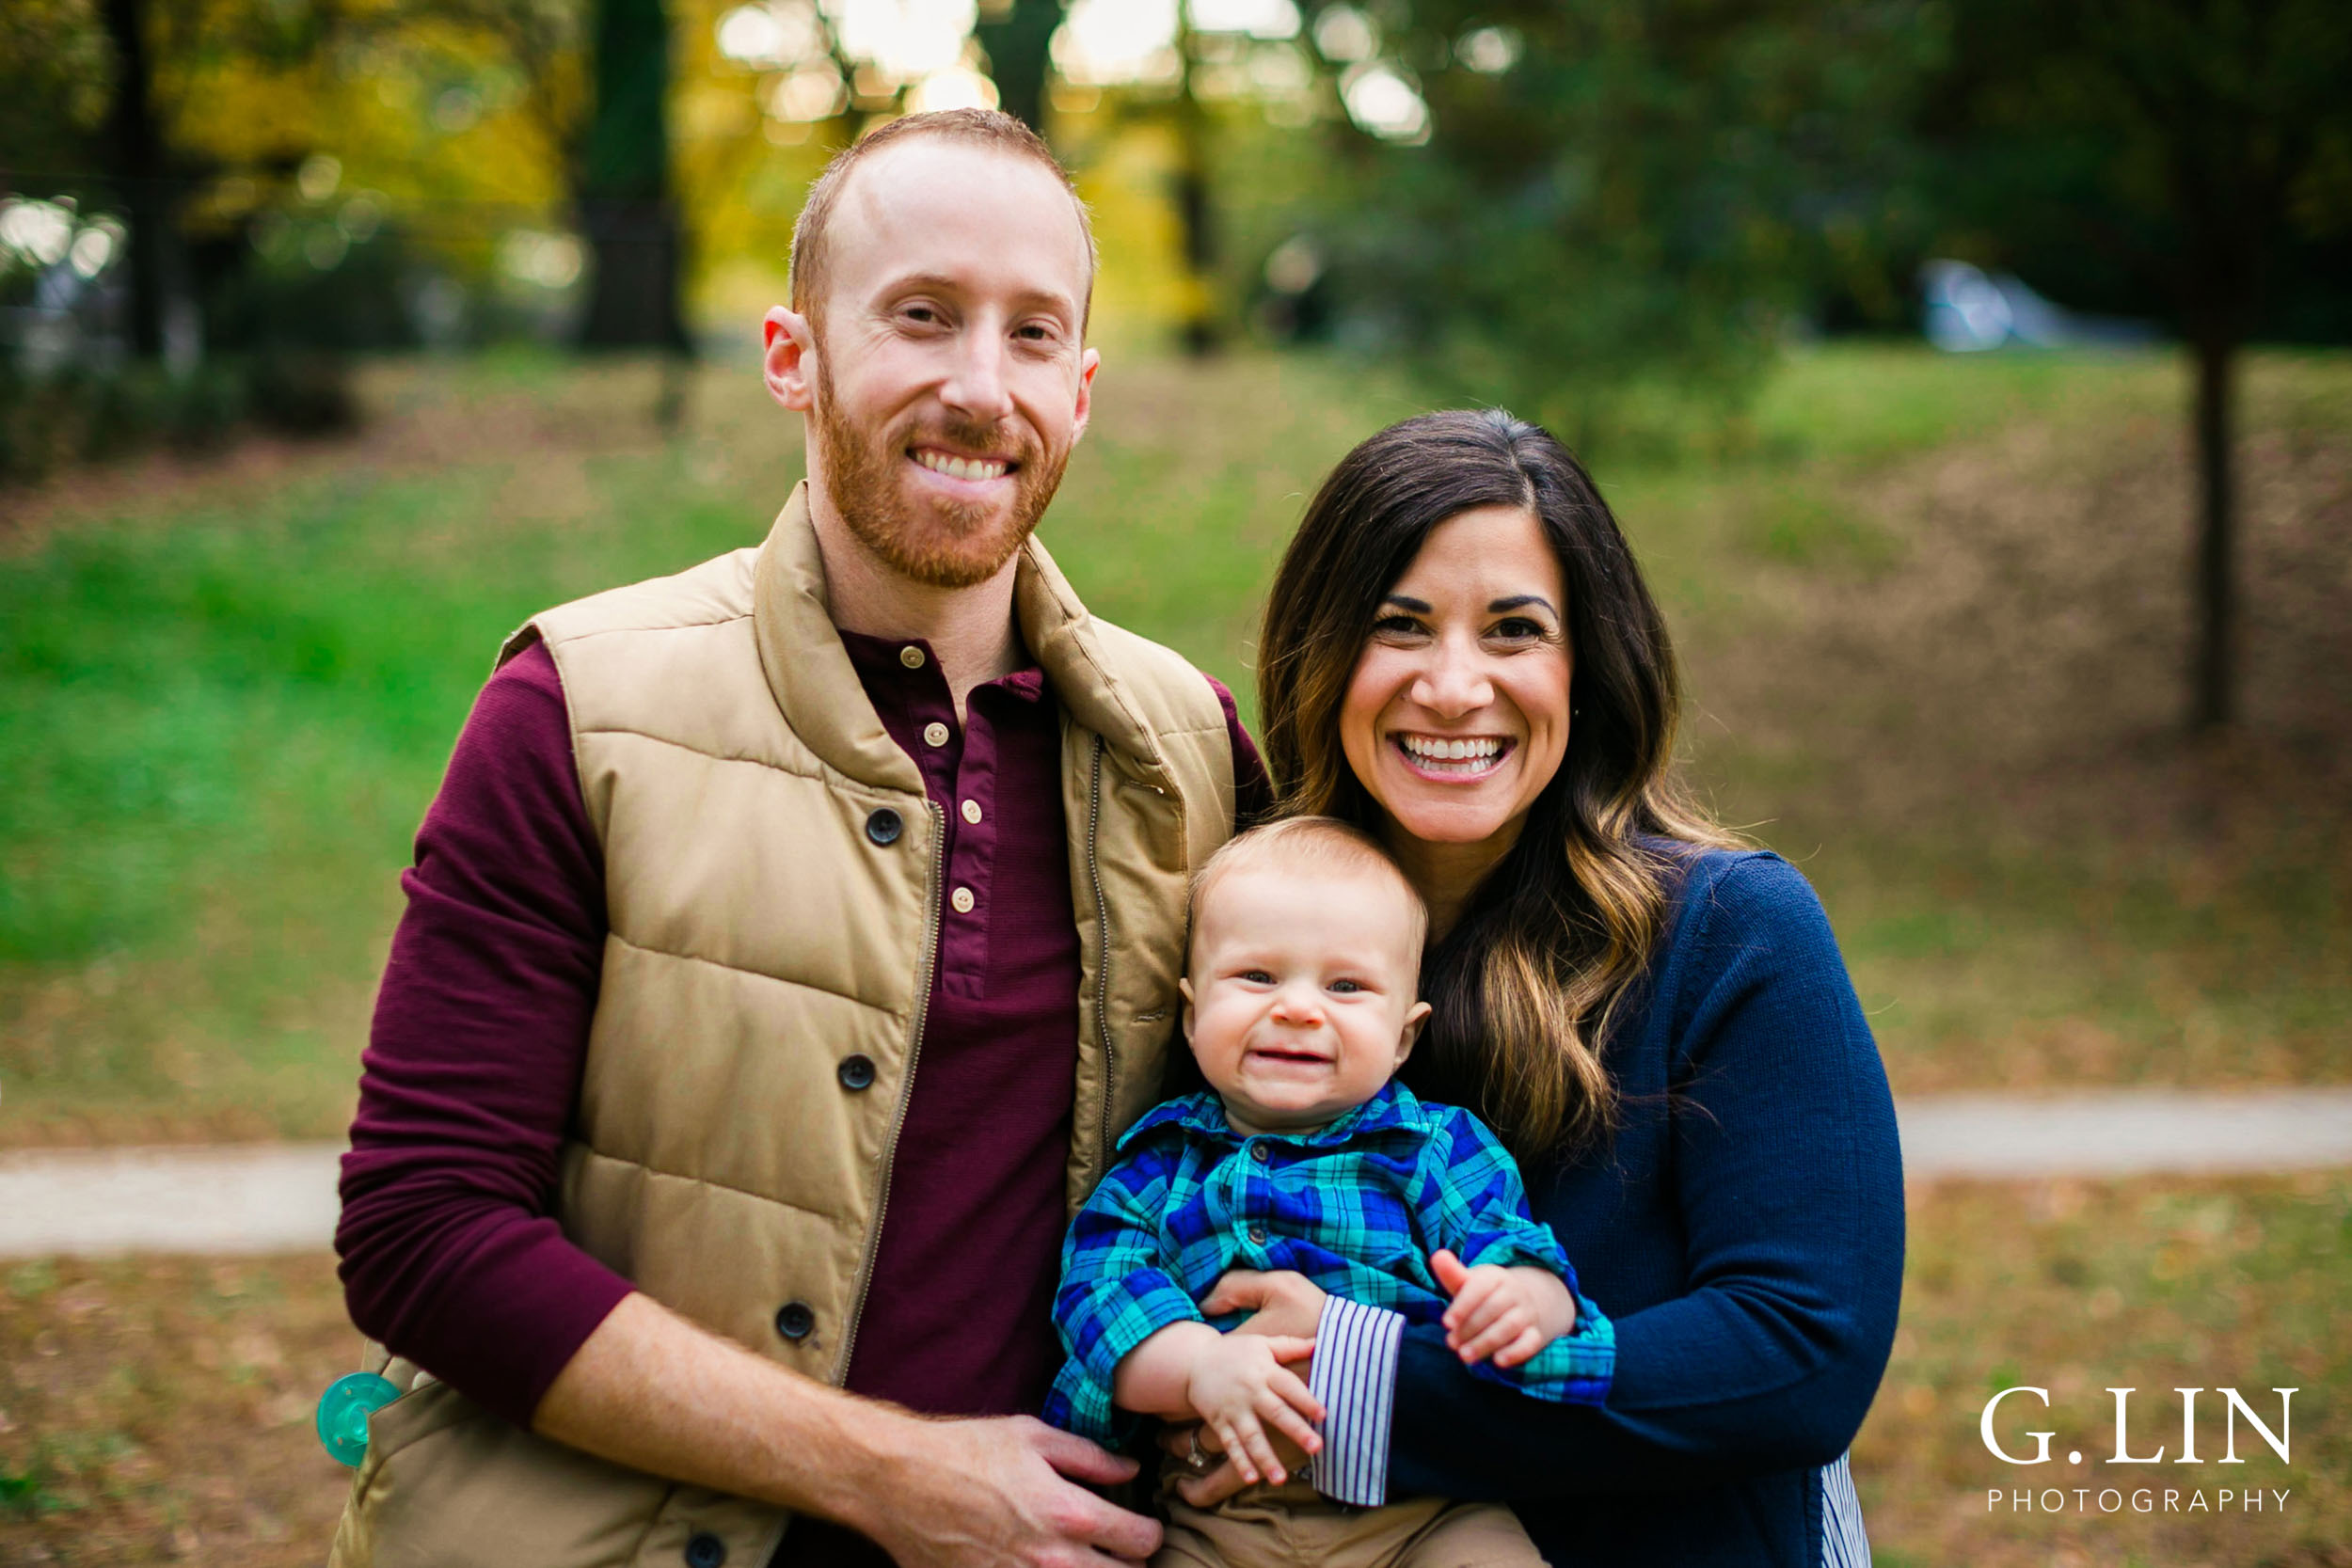 Raleigh Newborn Photographer | G. Lin photography | Classic family shot at oval park in durham